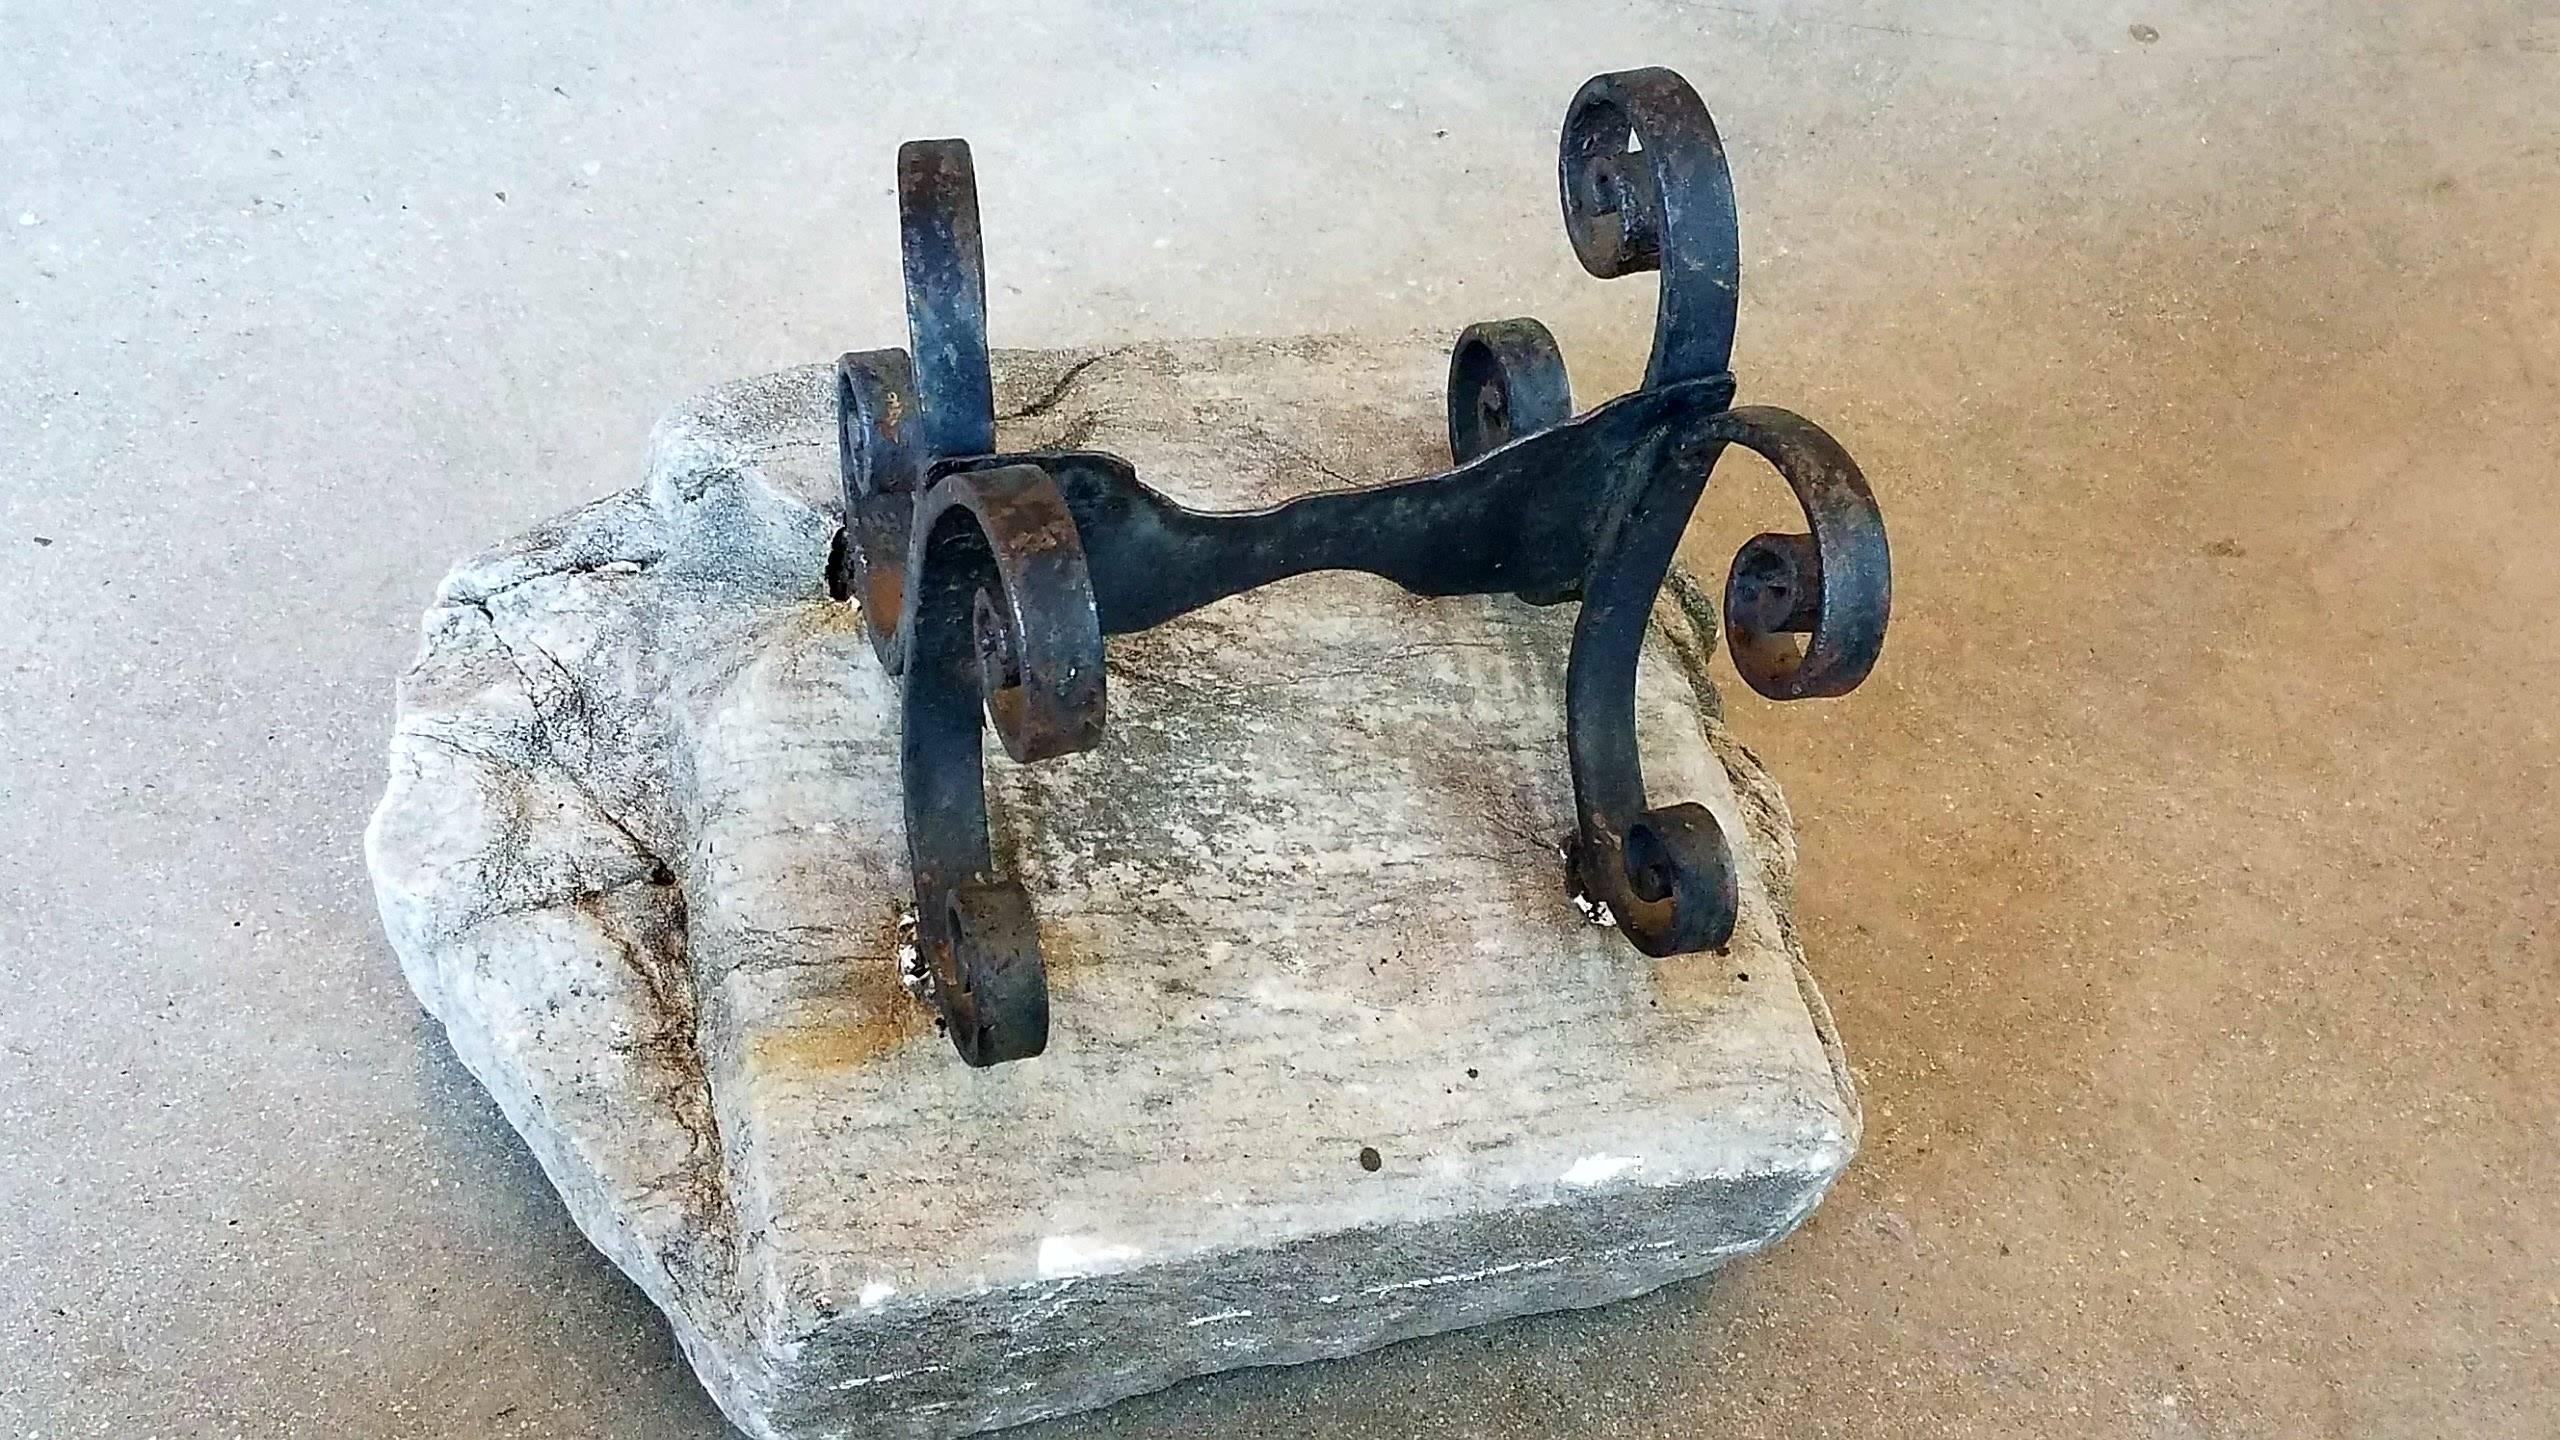 Using this antique boot scrape on a table for drama and effect in a vignette is the way of using it to it's fullest. The ancient stone it is mounted on has amazing character and presence.